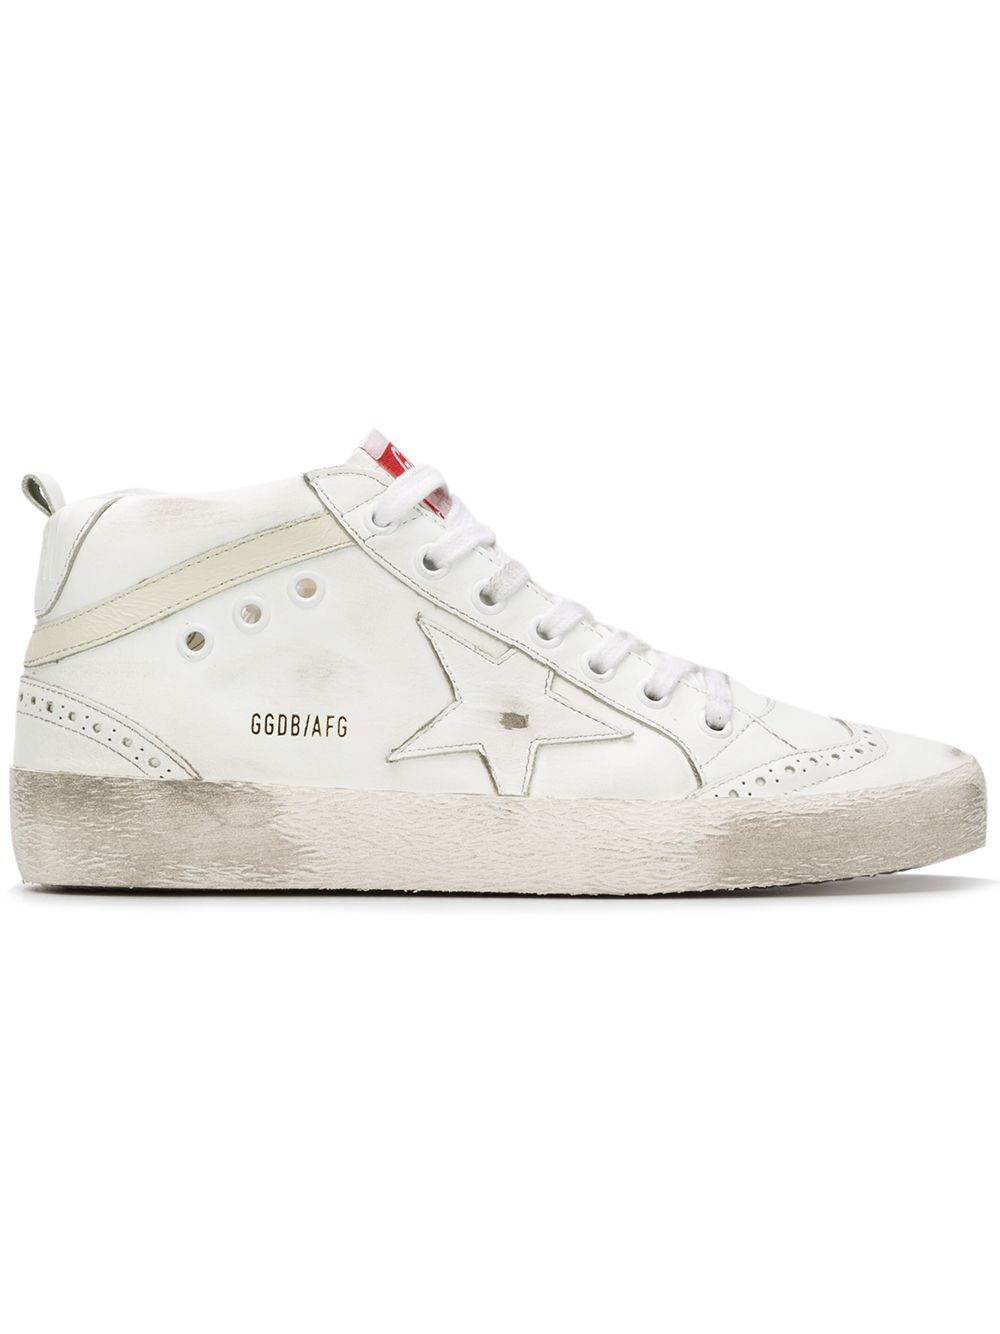 Golden Goose Deluxe Brand Mid Star sneakers - White | FarFetch US